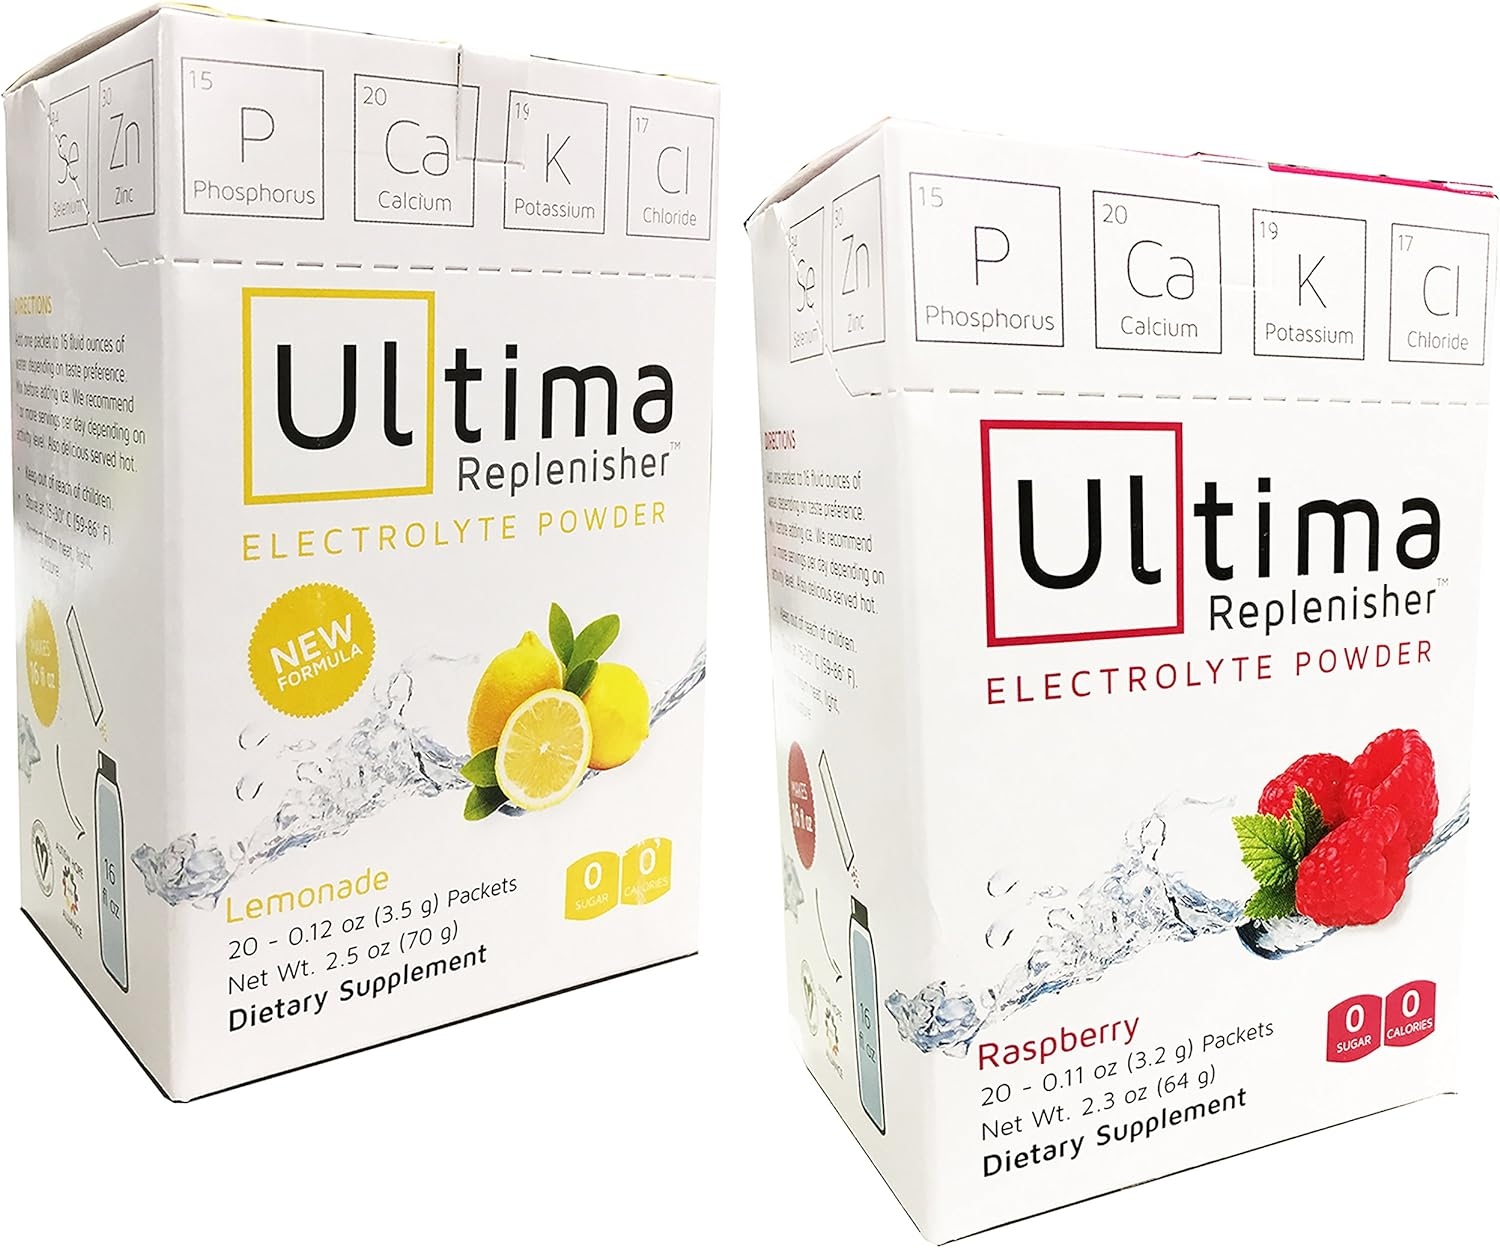 Ultima Replenisher Electrolyte Powder Raspberry and Lemonade Variety Pack of 40 Packets